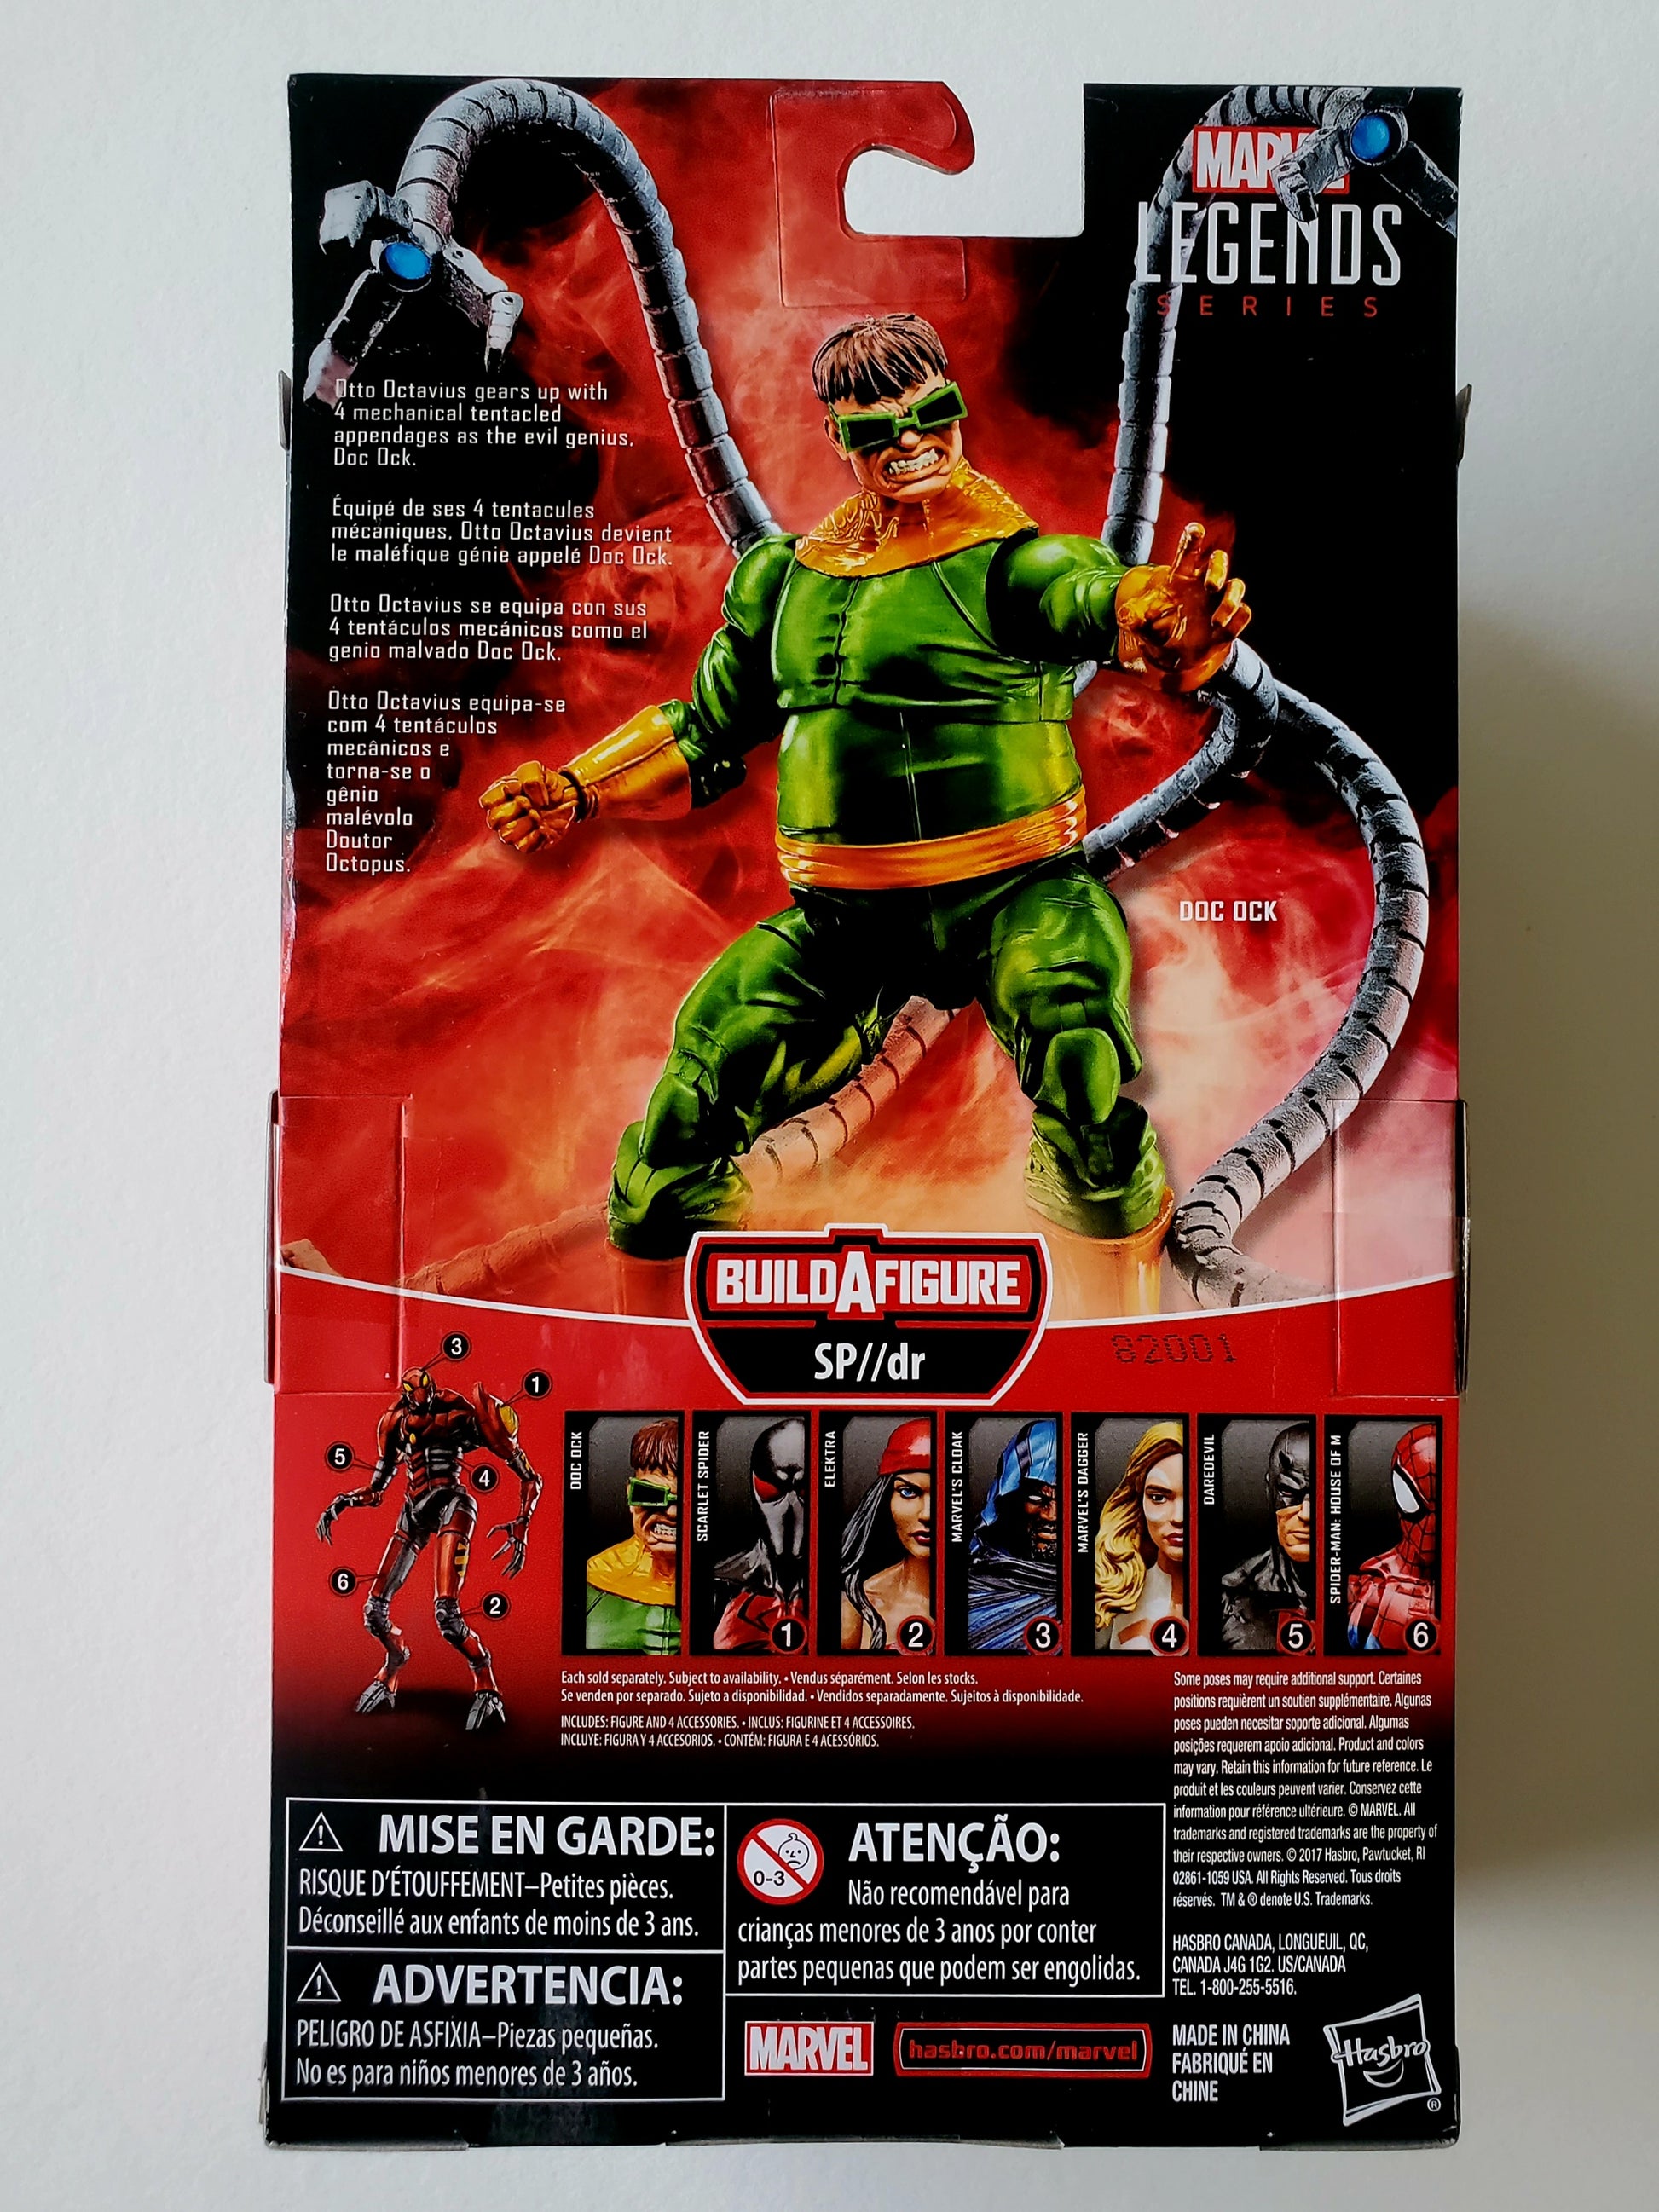 Come, See Toys: Marvel Avengers Infinite Series 3.75 Doctor Octopus (Doc  Ock)